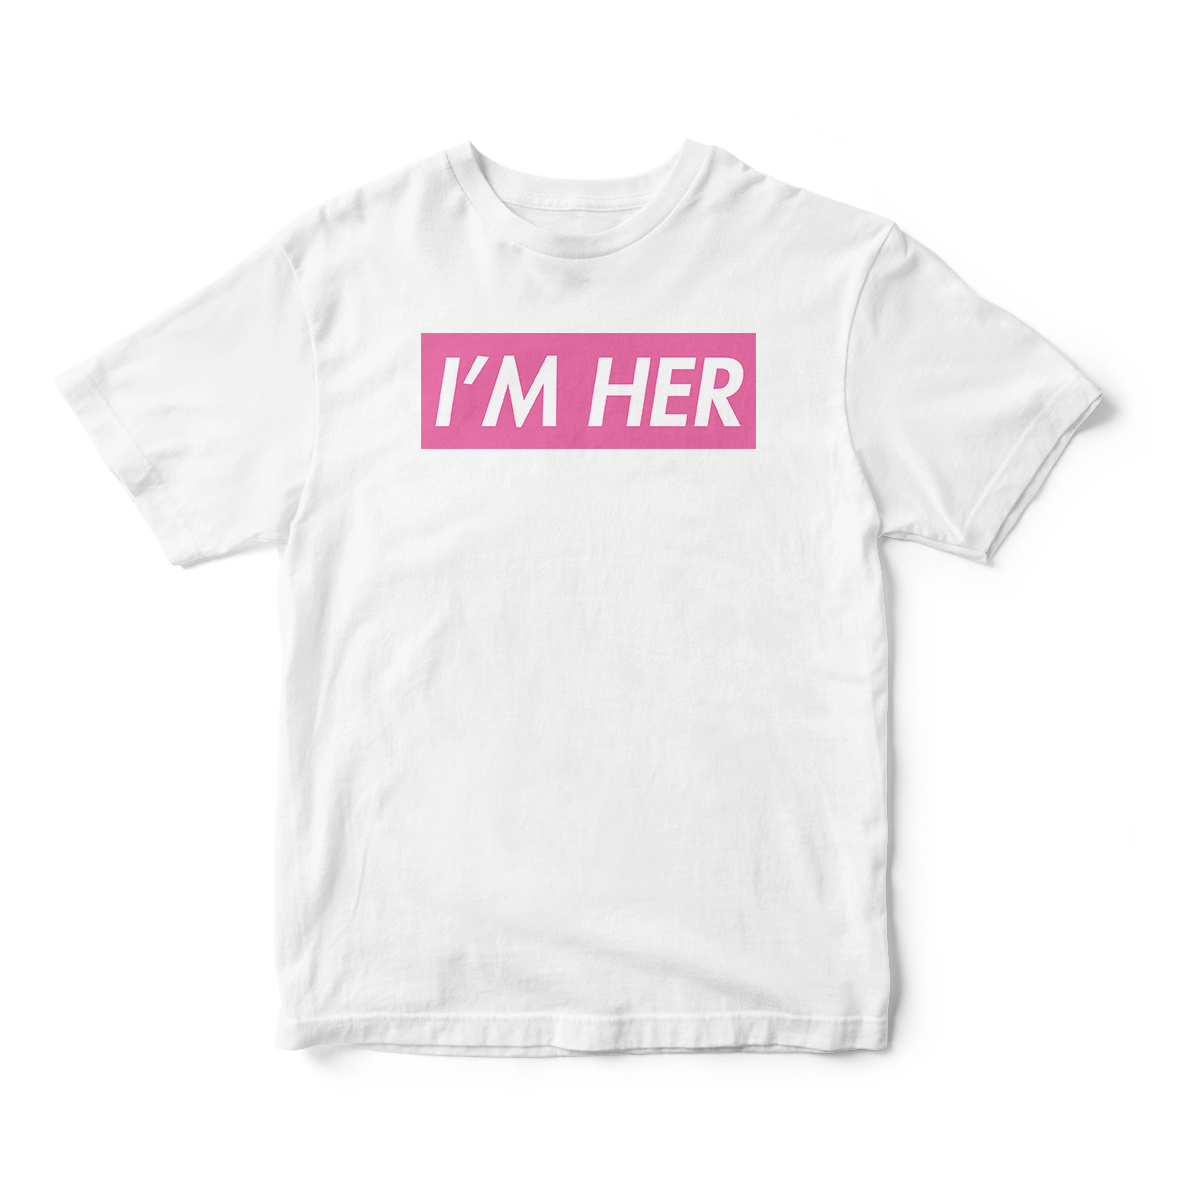 I'm Her in Pink Short Sleeve Tee